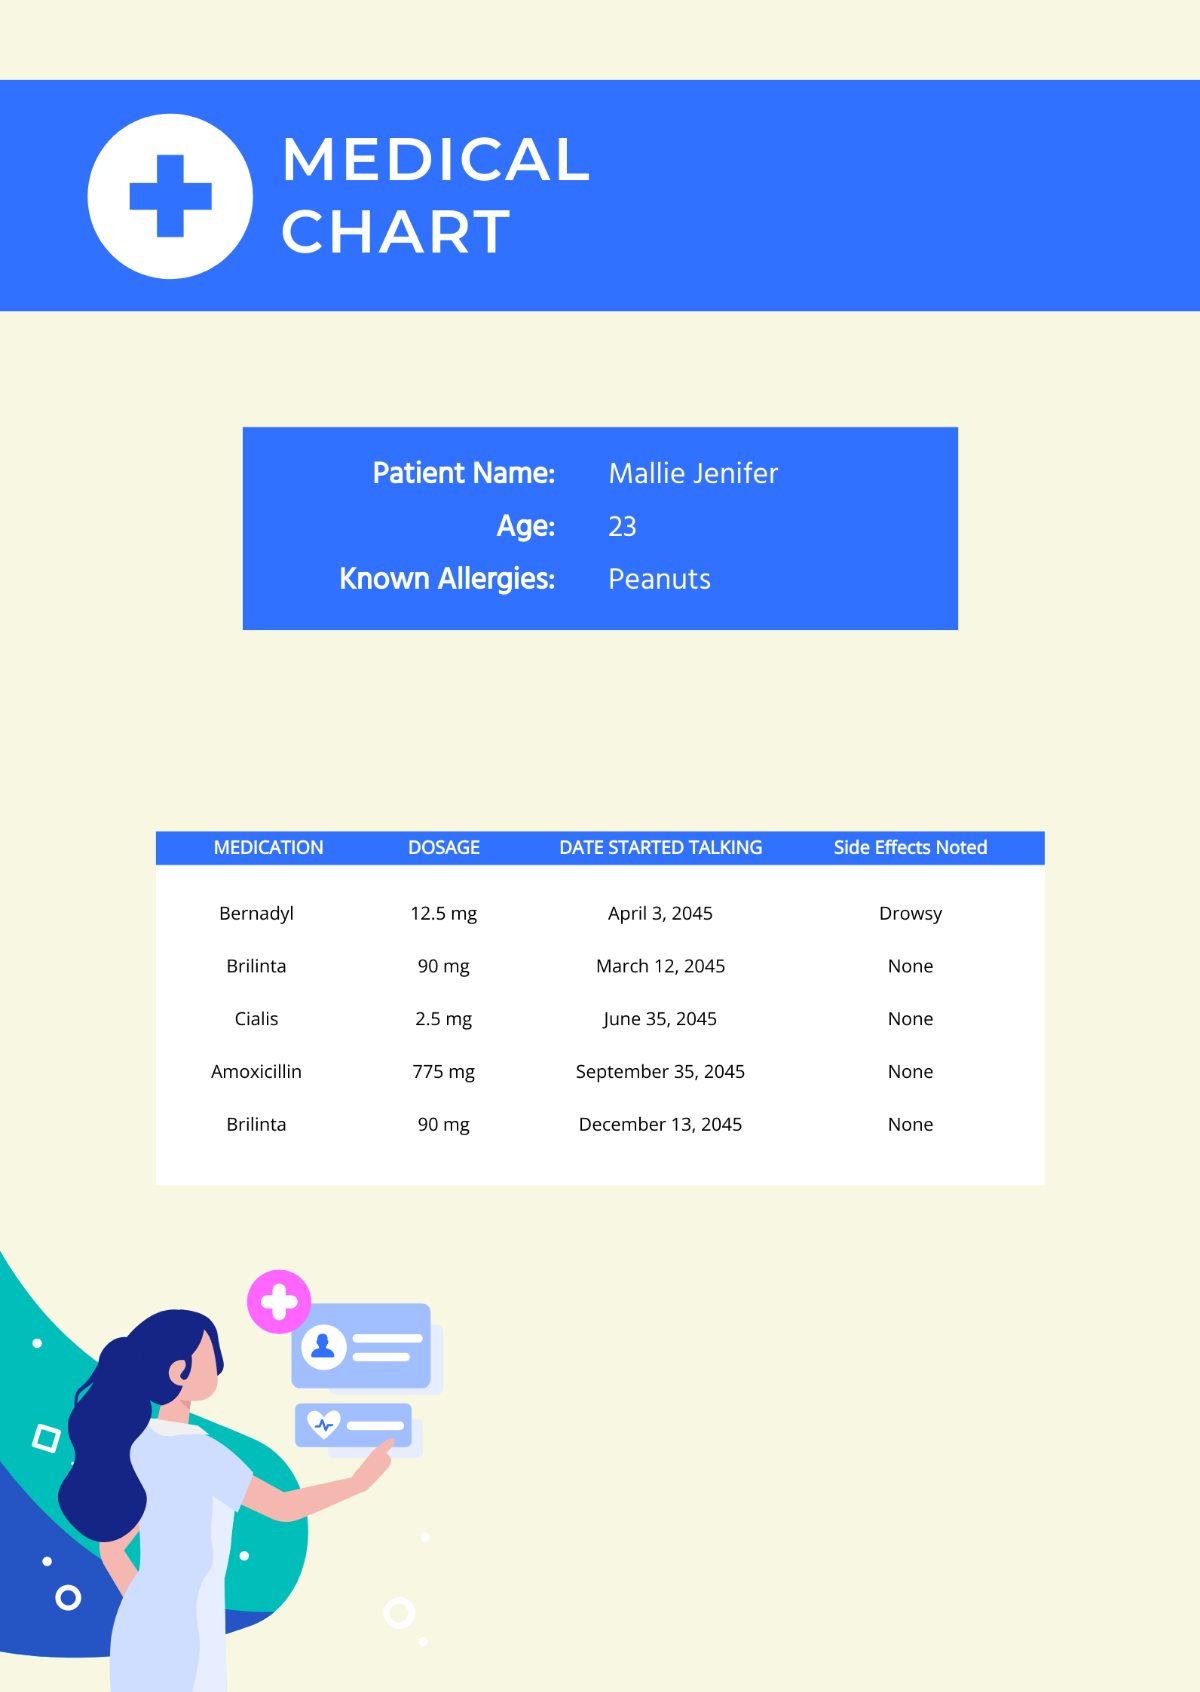 FREE Medication Templates & Examples - Edit Online & Download